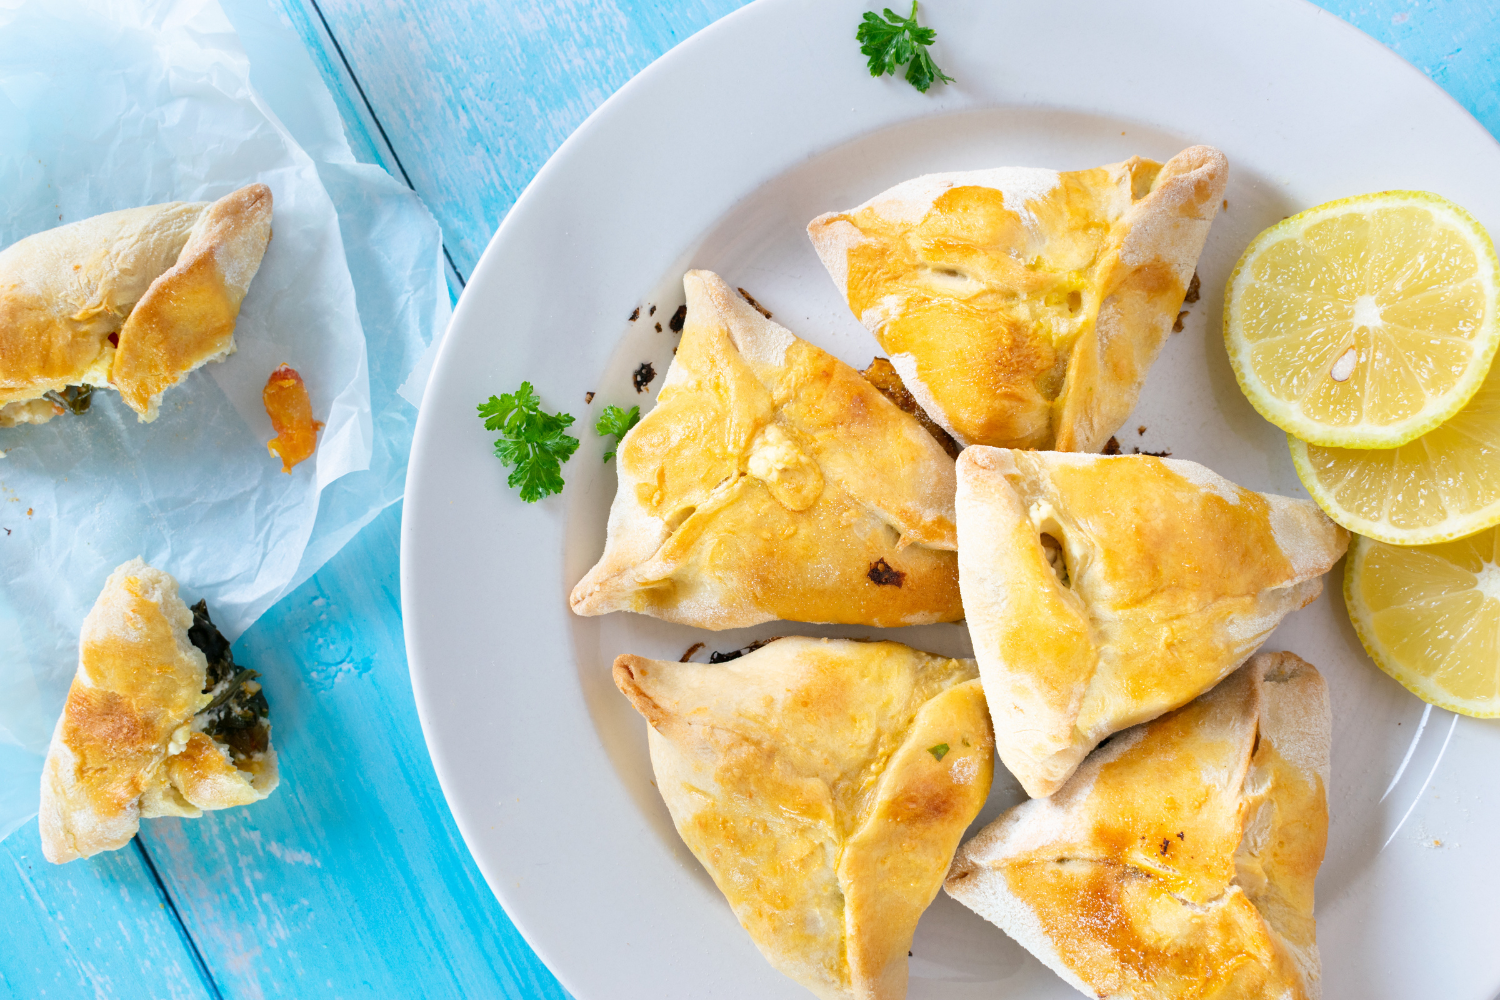 Lebanese Spinach Pies